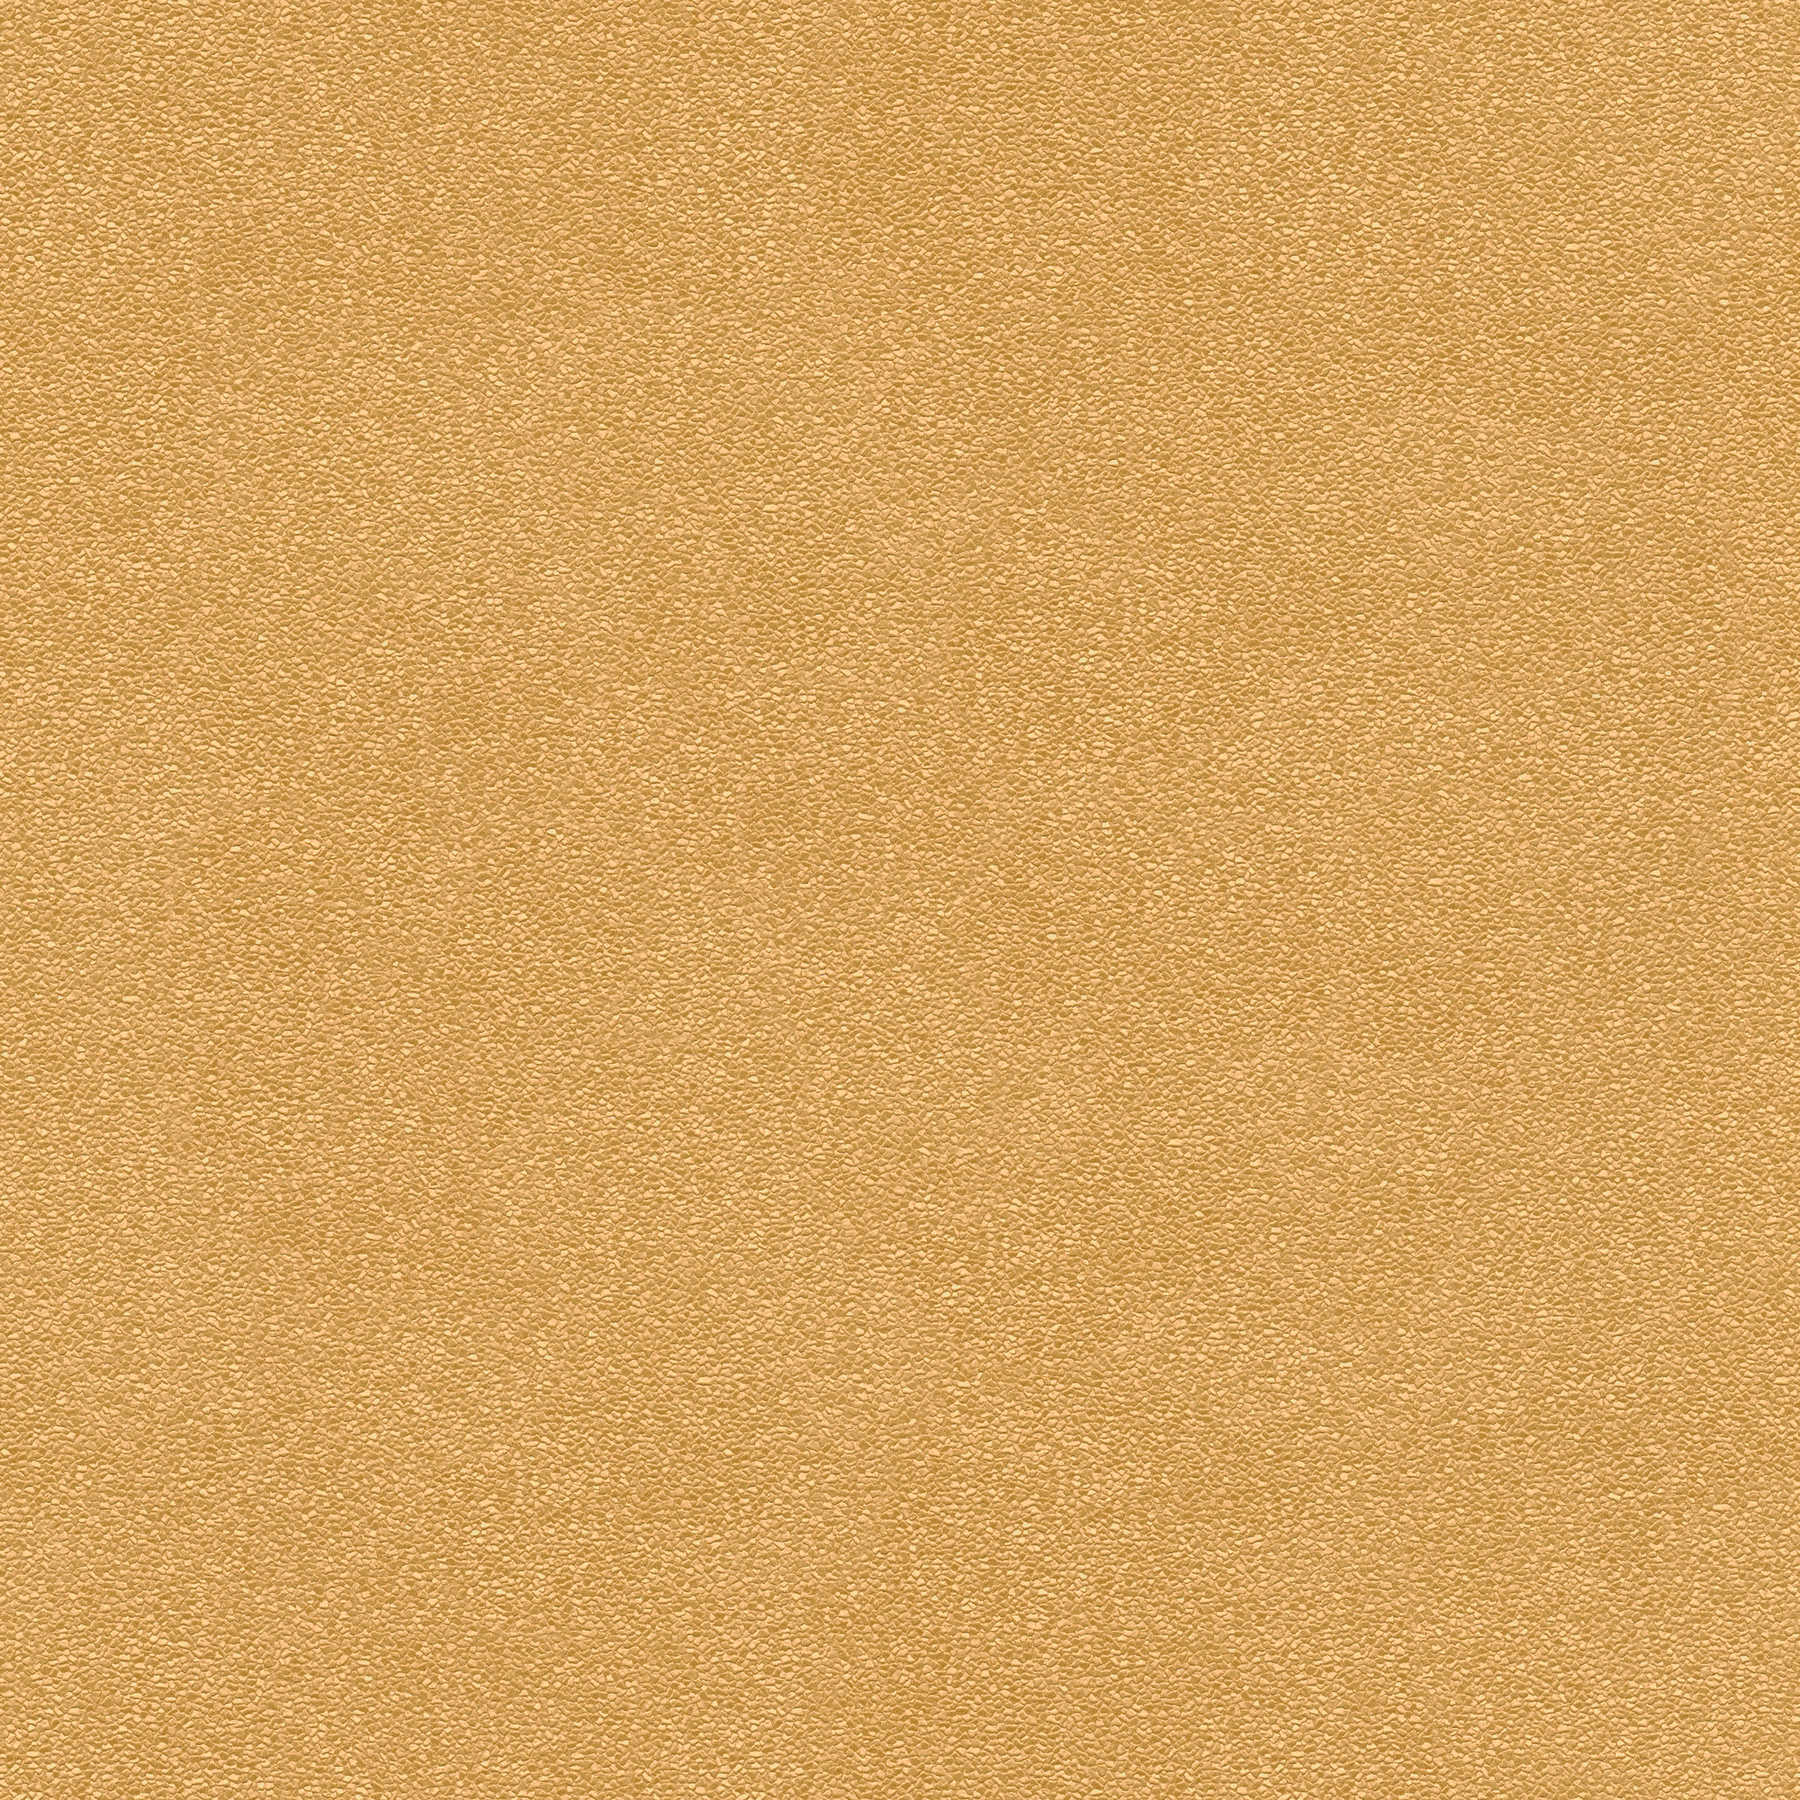 Golden wallpaper non-woven with nugget texture pattern
